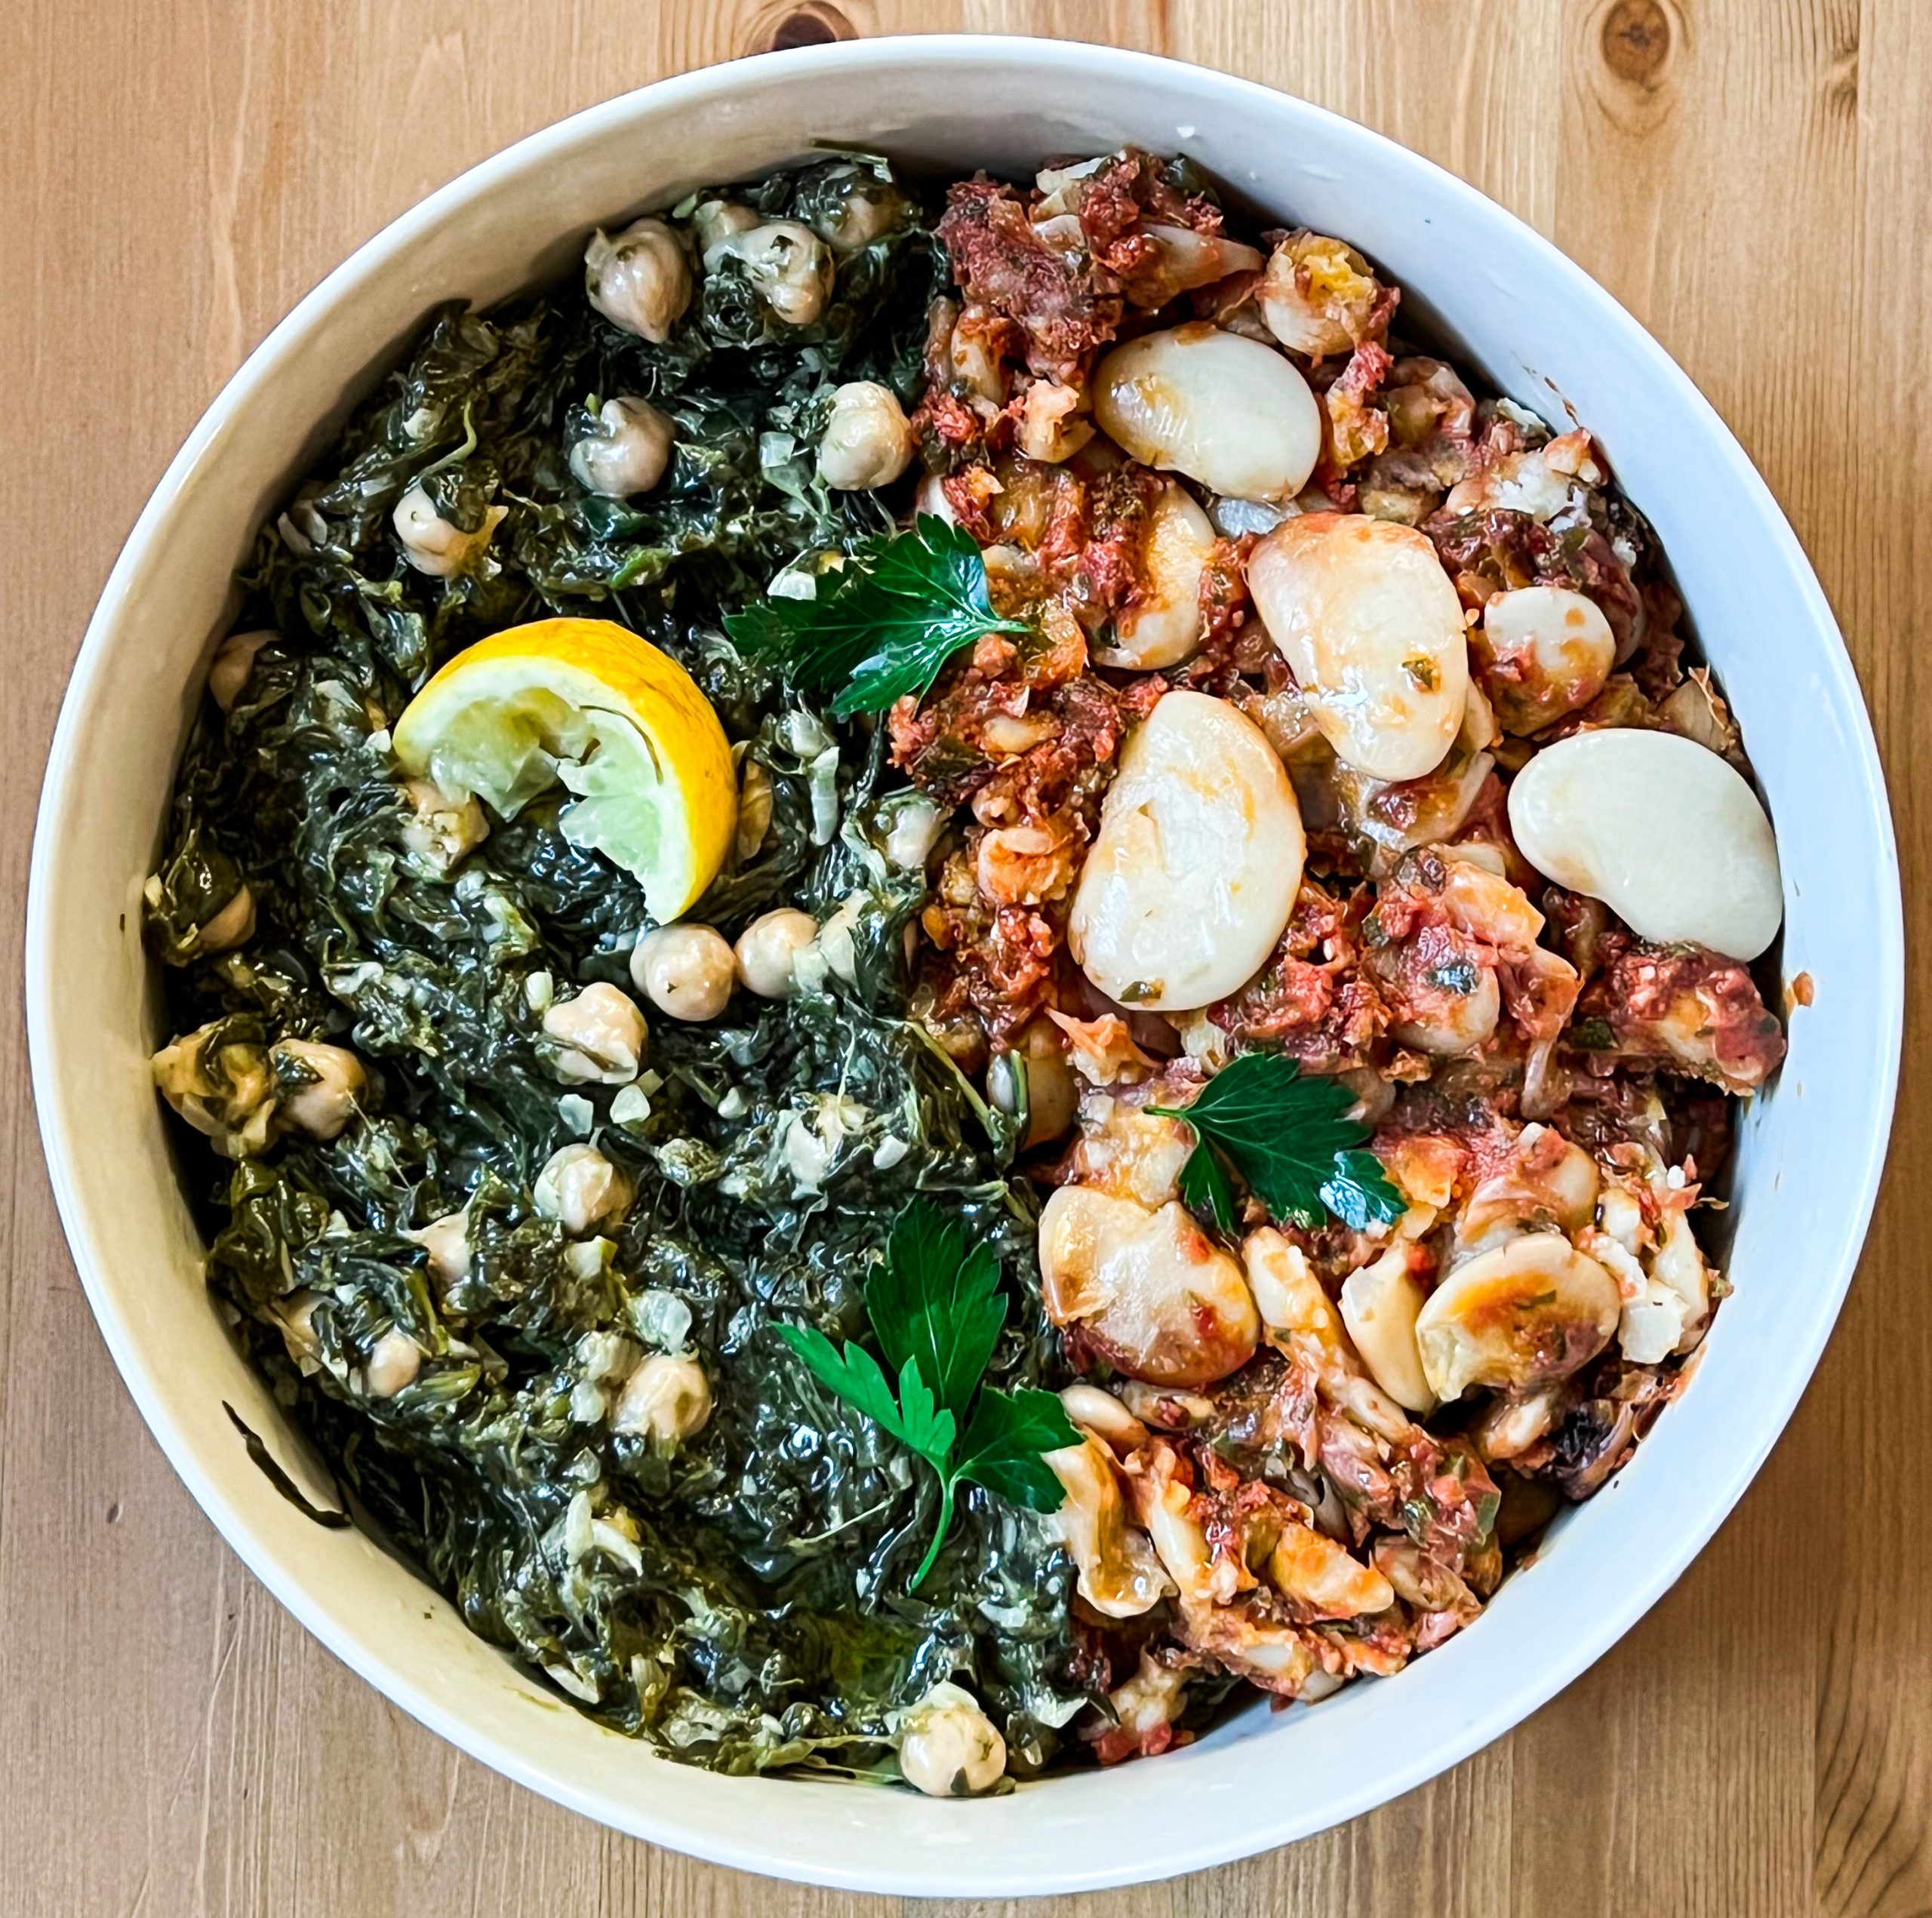 Warm Lemony Spinach with Chickpeas AND Baked Broad Beans with Tomatoes, Garlic and Oregano